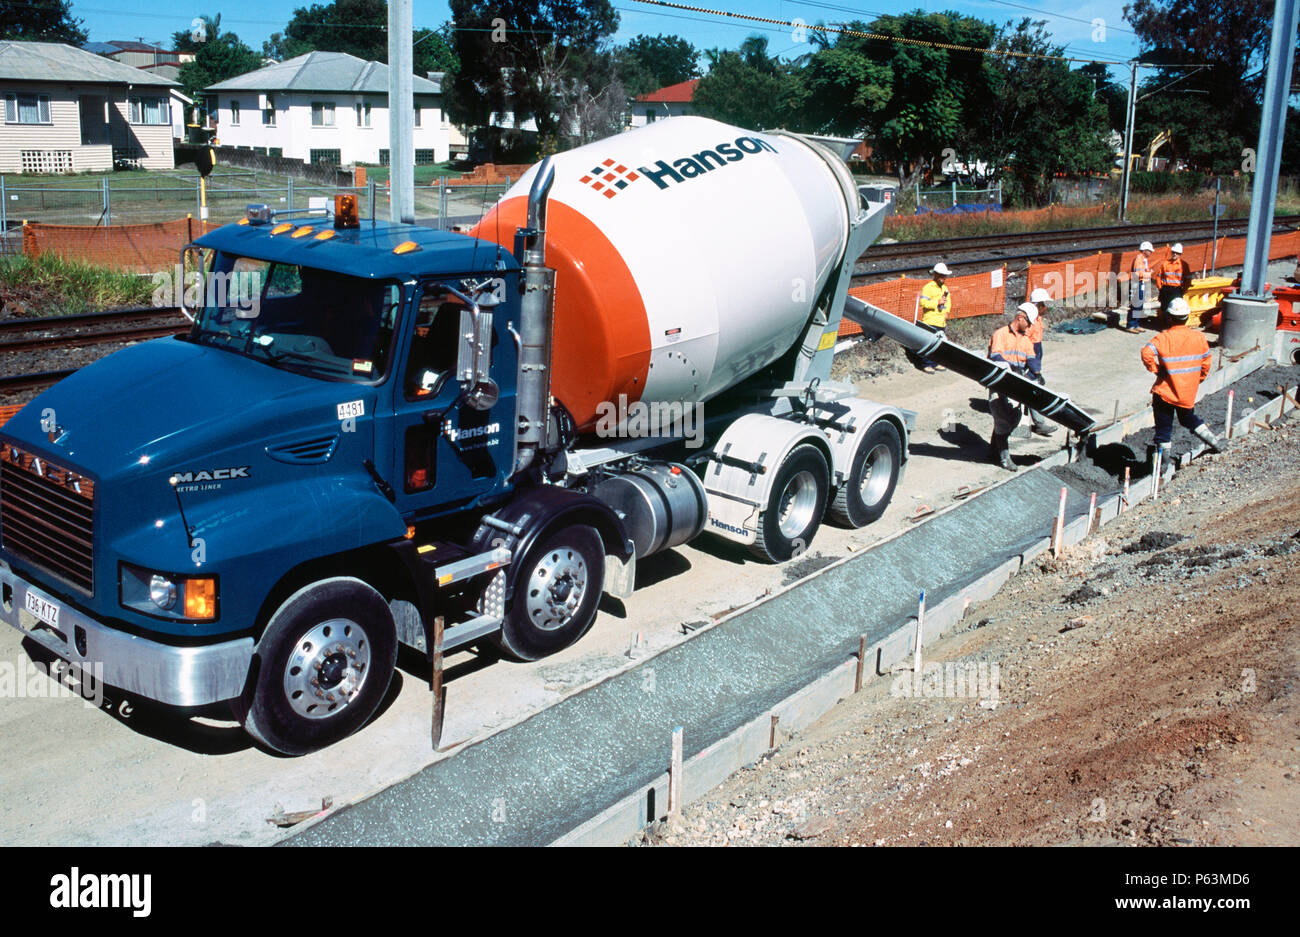 Concreting Services Sutherland Shire